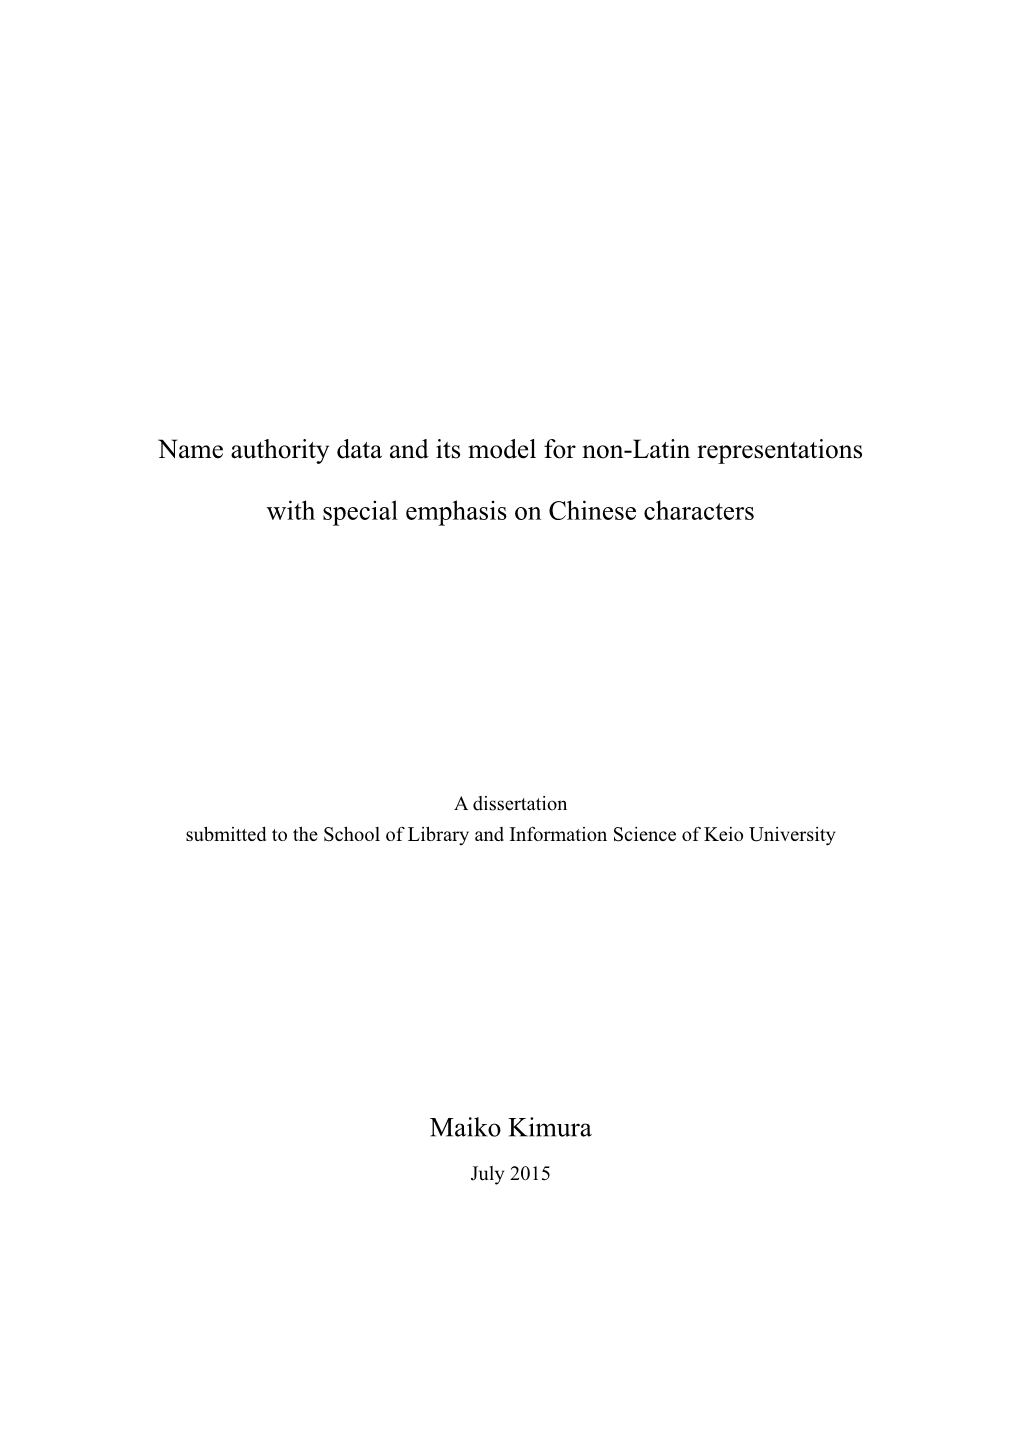 Name Authority Data and Its Model for Non-Latin Representations With